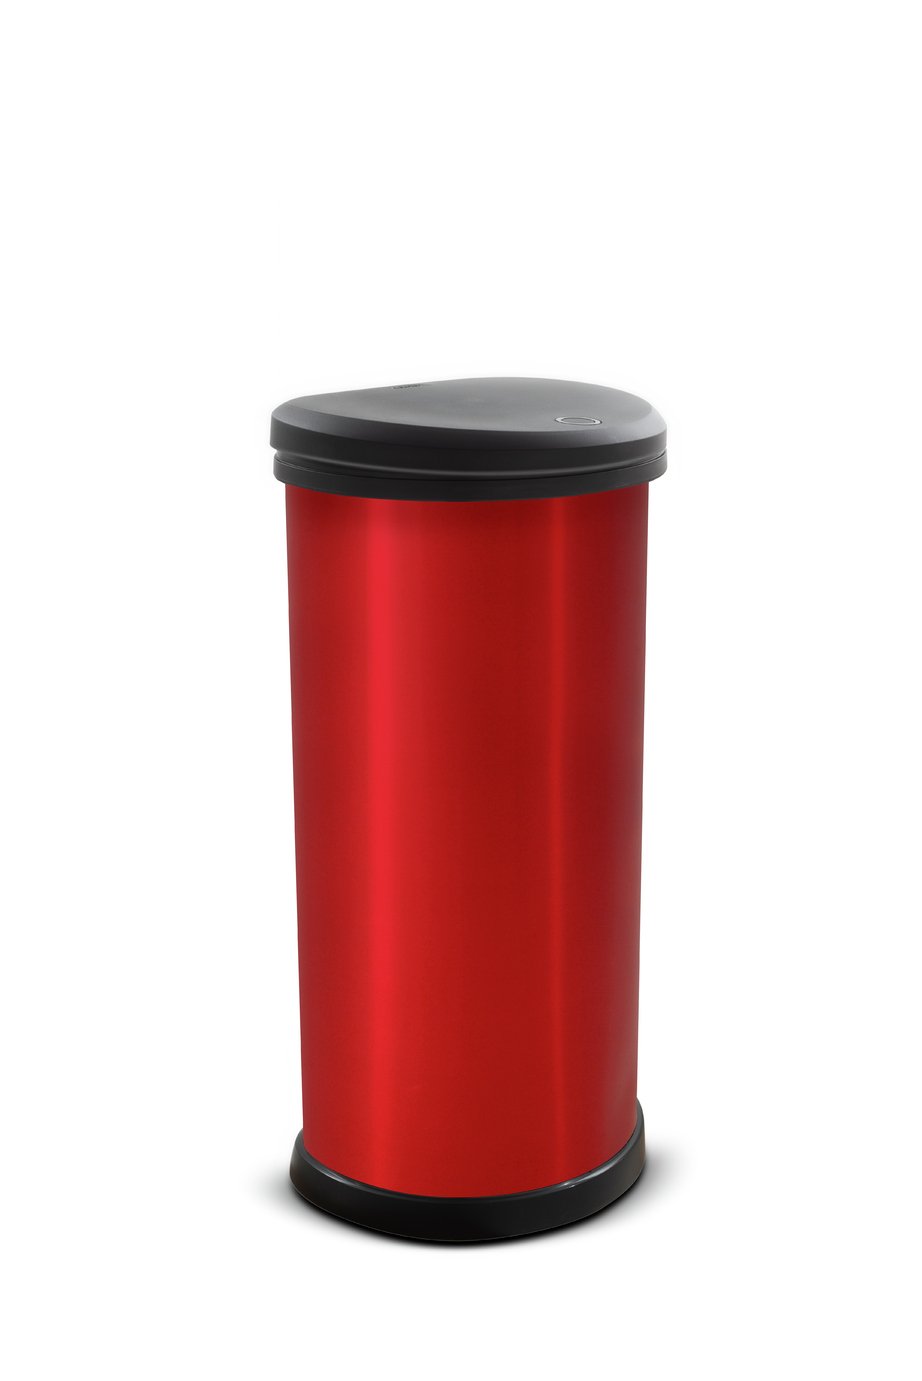 Curver 40 Litre Deco Touch Top Kitchen Bin - Red